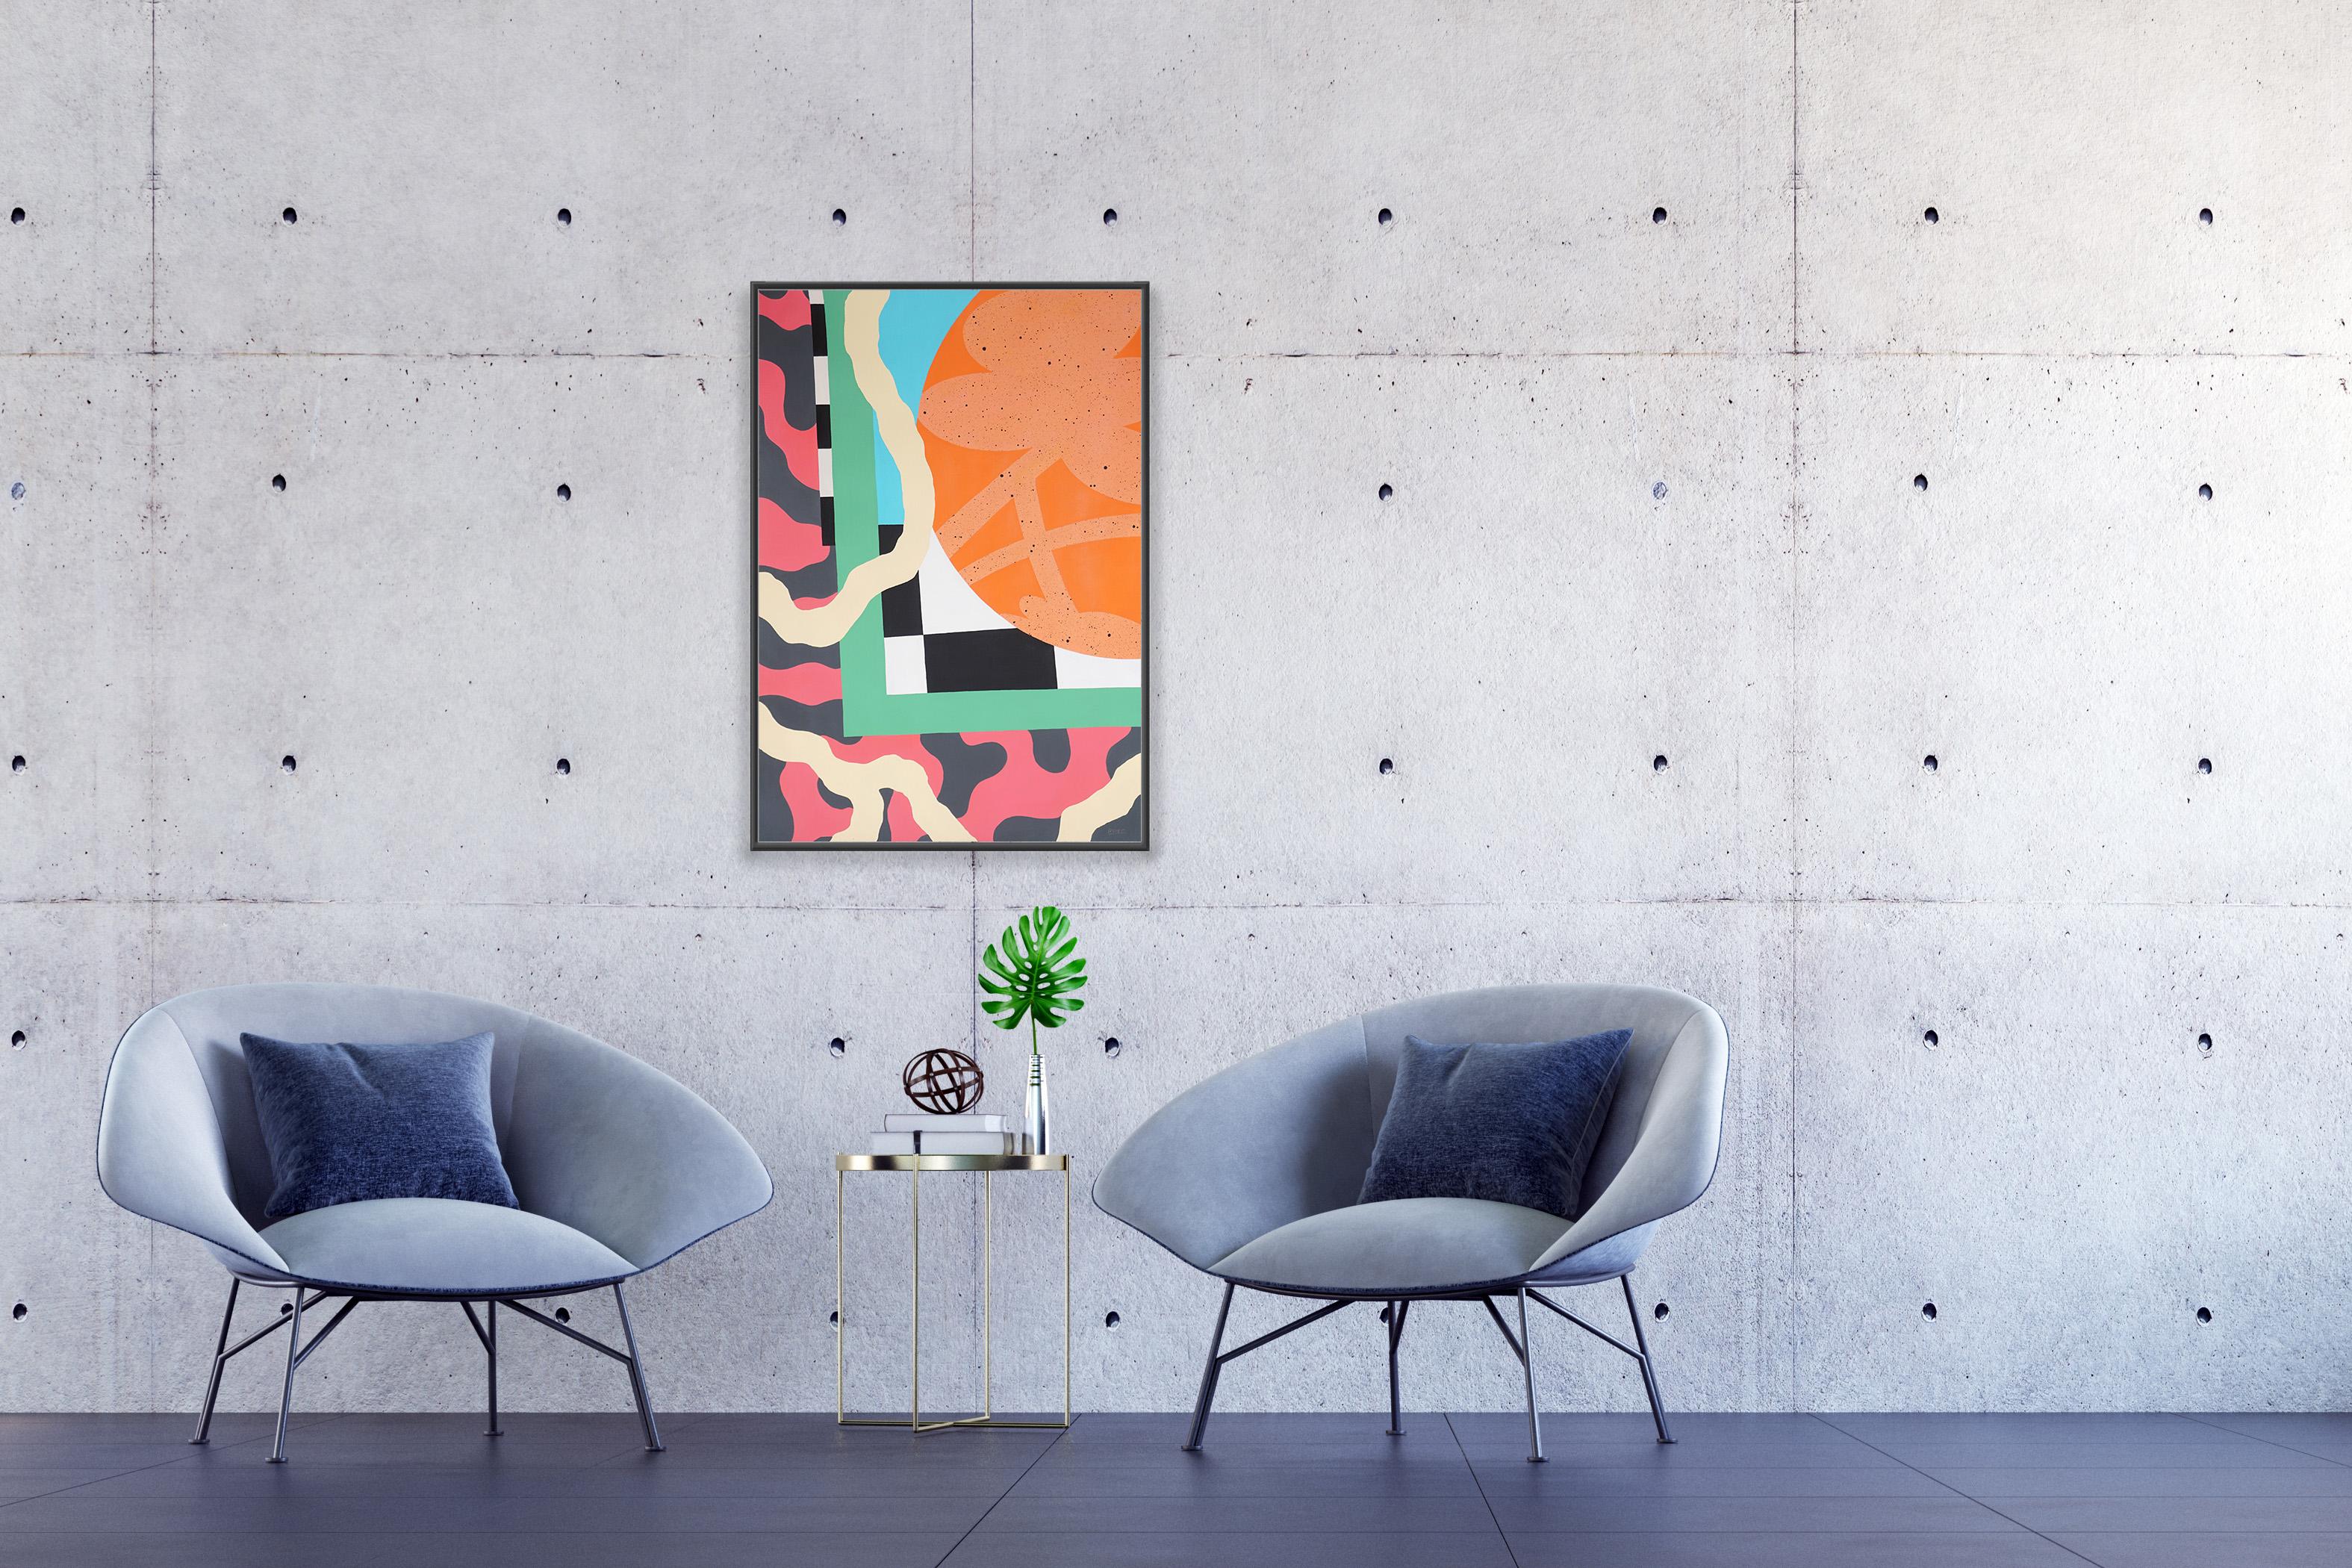 Abstract Painting, Urban Flowers in Orange, Red and Black Patterns, 90s Inspired For Sale 3